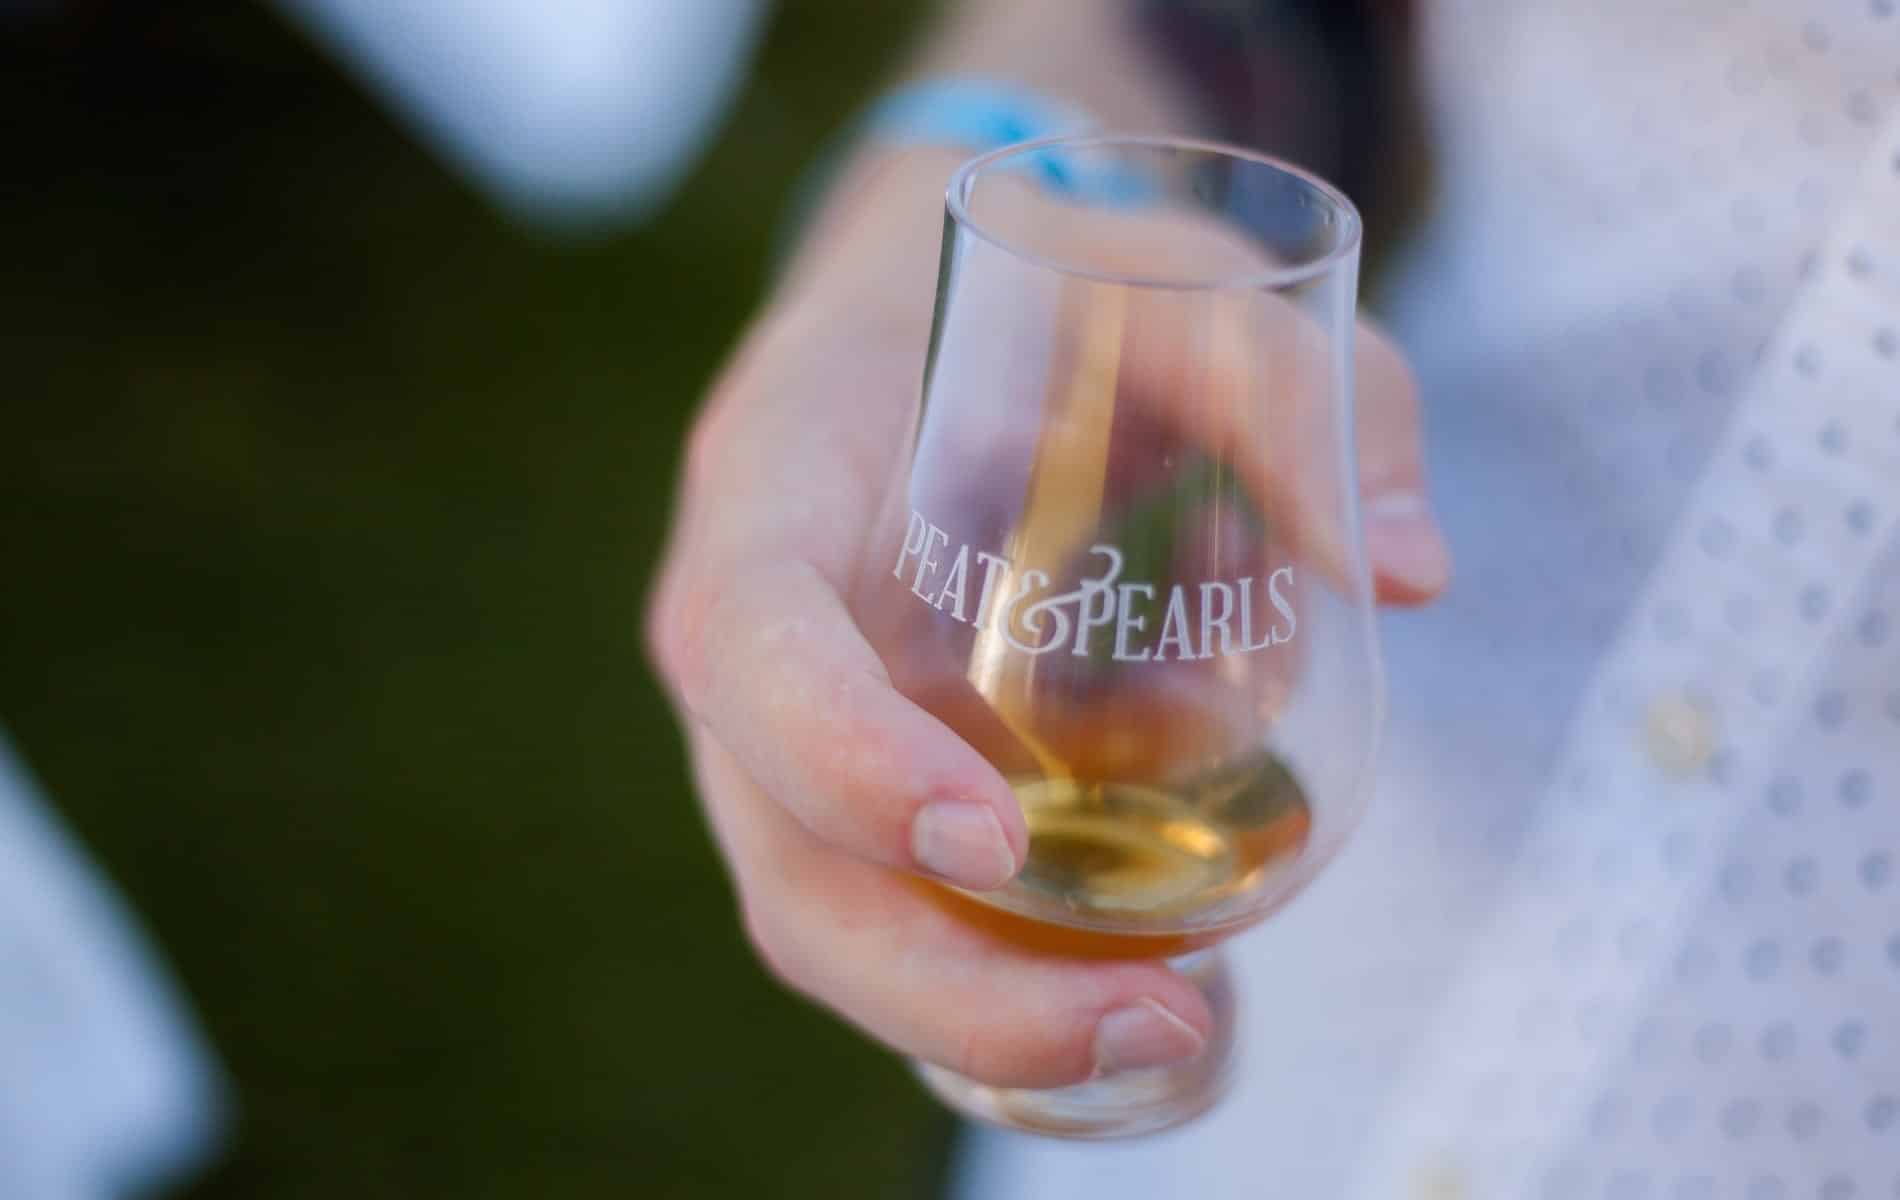 2018 Peat & Pearls scotch and oysters festival in Downtown Pensacola, Florida